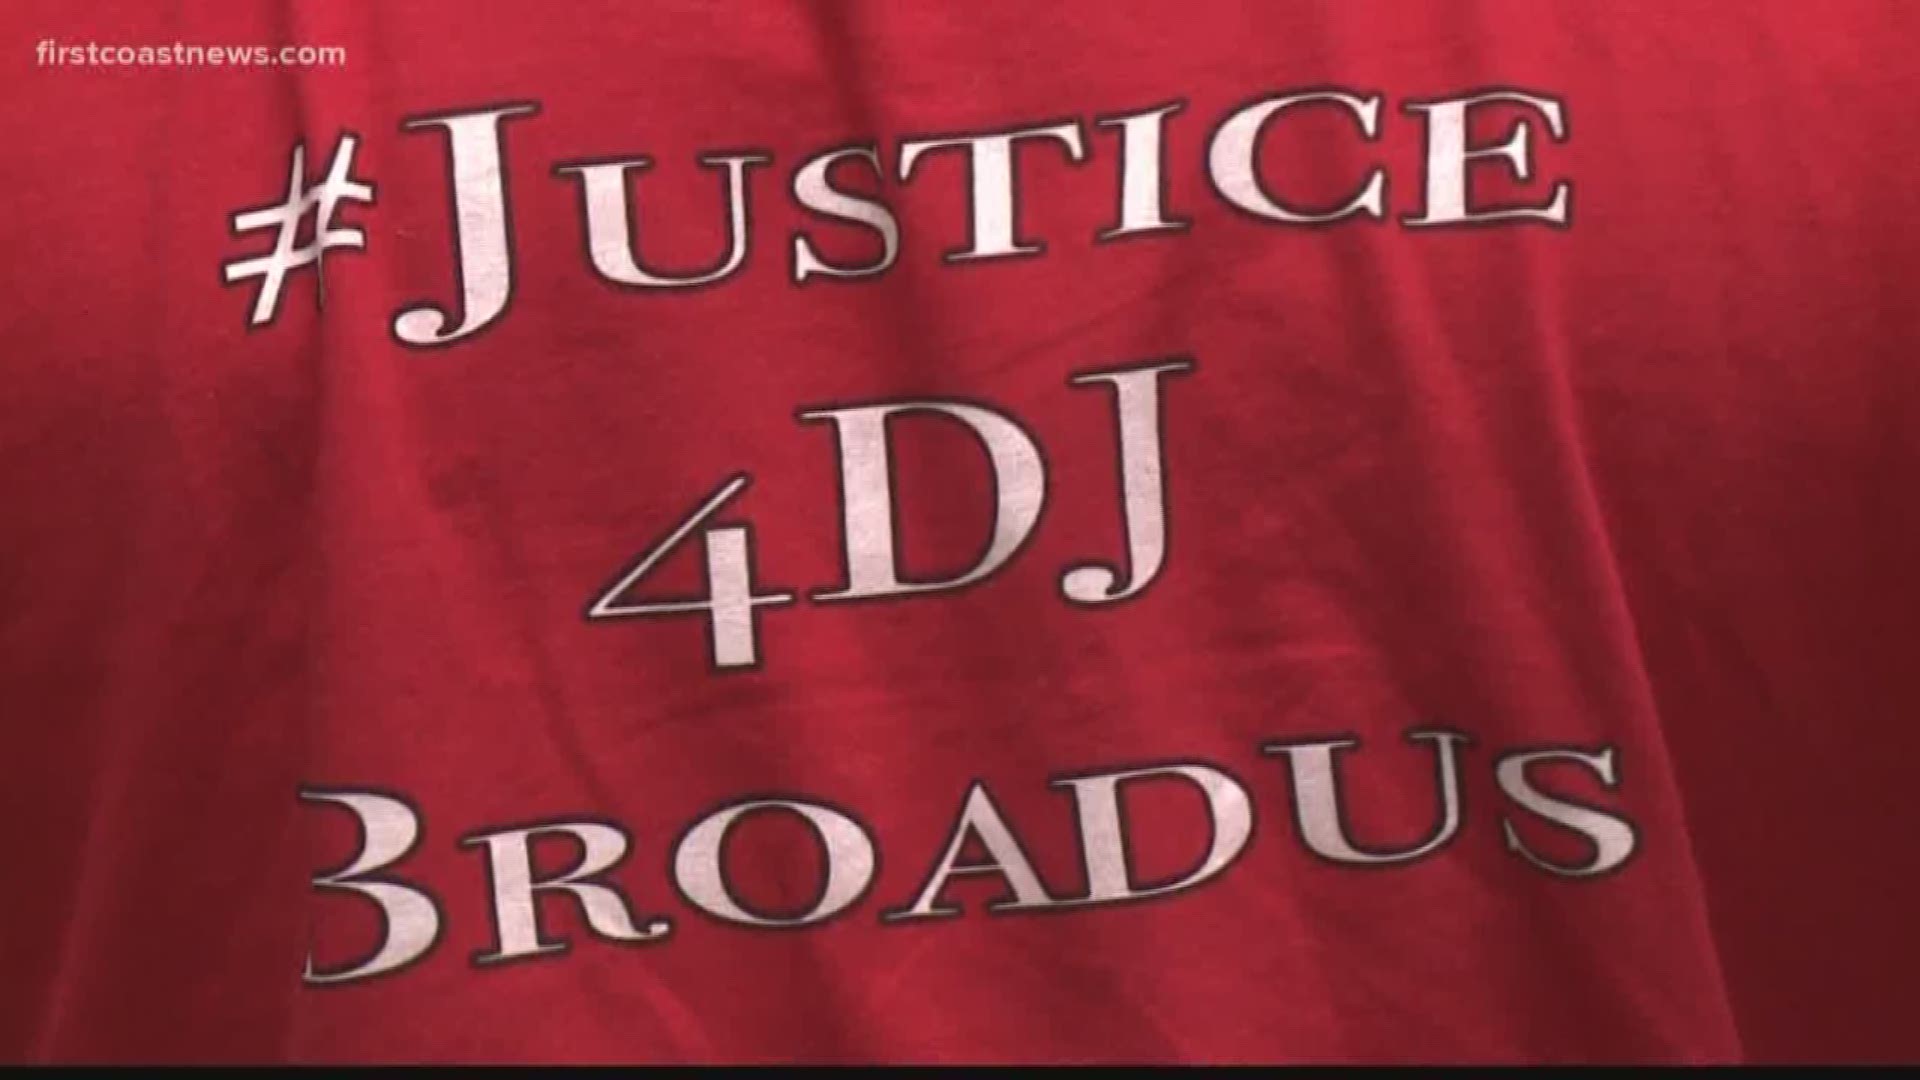 It's been 47 days and still no answers to the death of DJ Broadus in McClenny, who was shot to death.